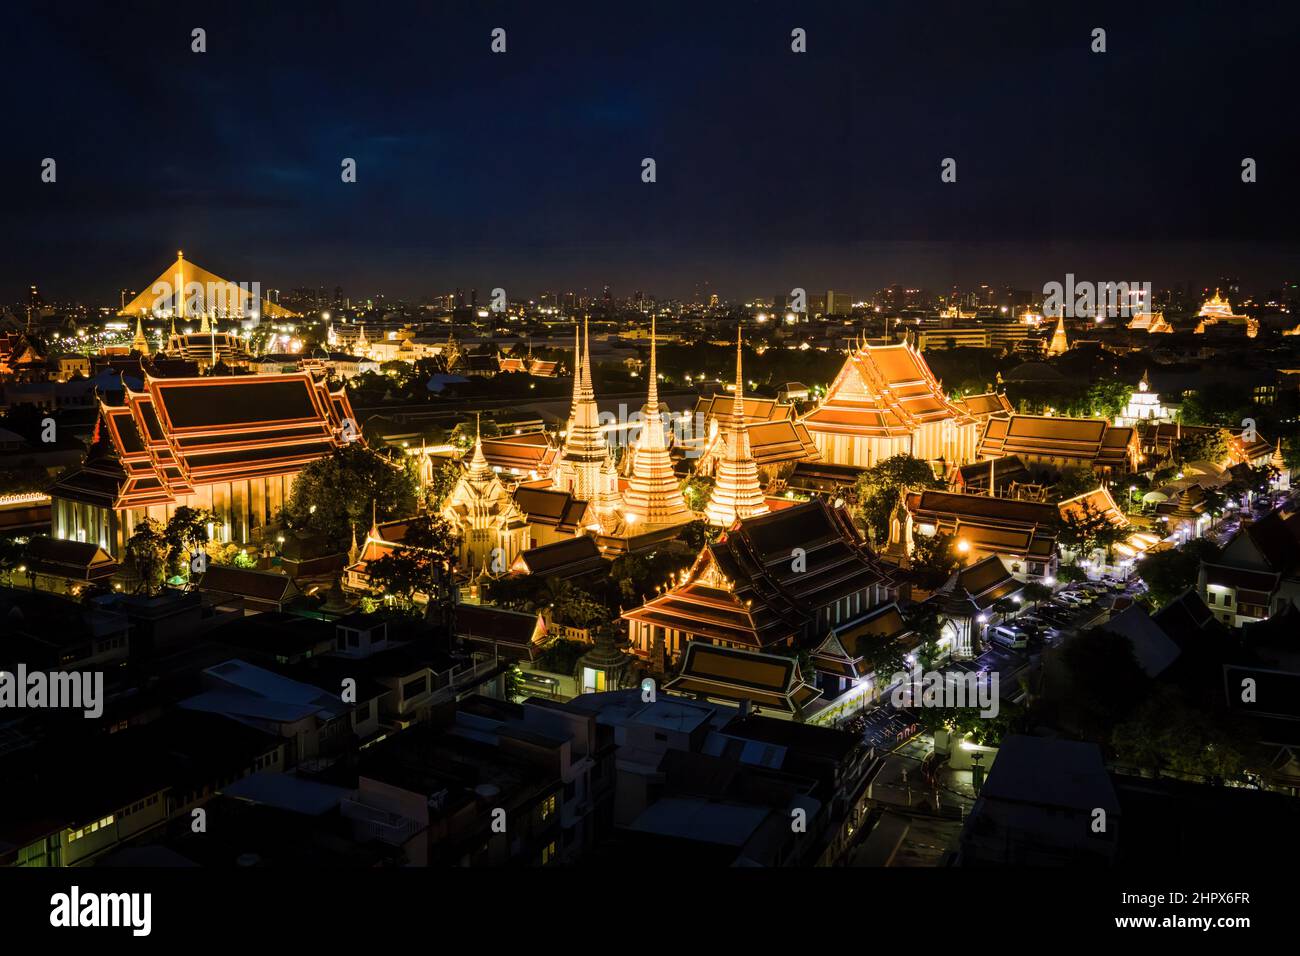 July 25, 2021, Bangkok, Thailand: (EDITOR'S NOTE: Image taken with drone).Aerial view of the Grand Palace in Bangkok.Two of Thailand's most famous cultural heritage sites and tourist attractions, Wat Arun (Temple of Dawn) and The Grand Palace, are illuminated at night along the Chao Praya River in Bangkok. The Thai Government recently announced eased entry requirements for international tourists visiting Thailand amidst a surge in the Omicron variant of COVID-19 throughout the country, with cases topping 20,000 reported infections per day. (Credit Image: © Matt Hunt/SOPA Images via ZUMA Press Stock Photo